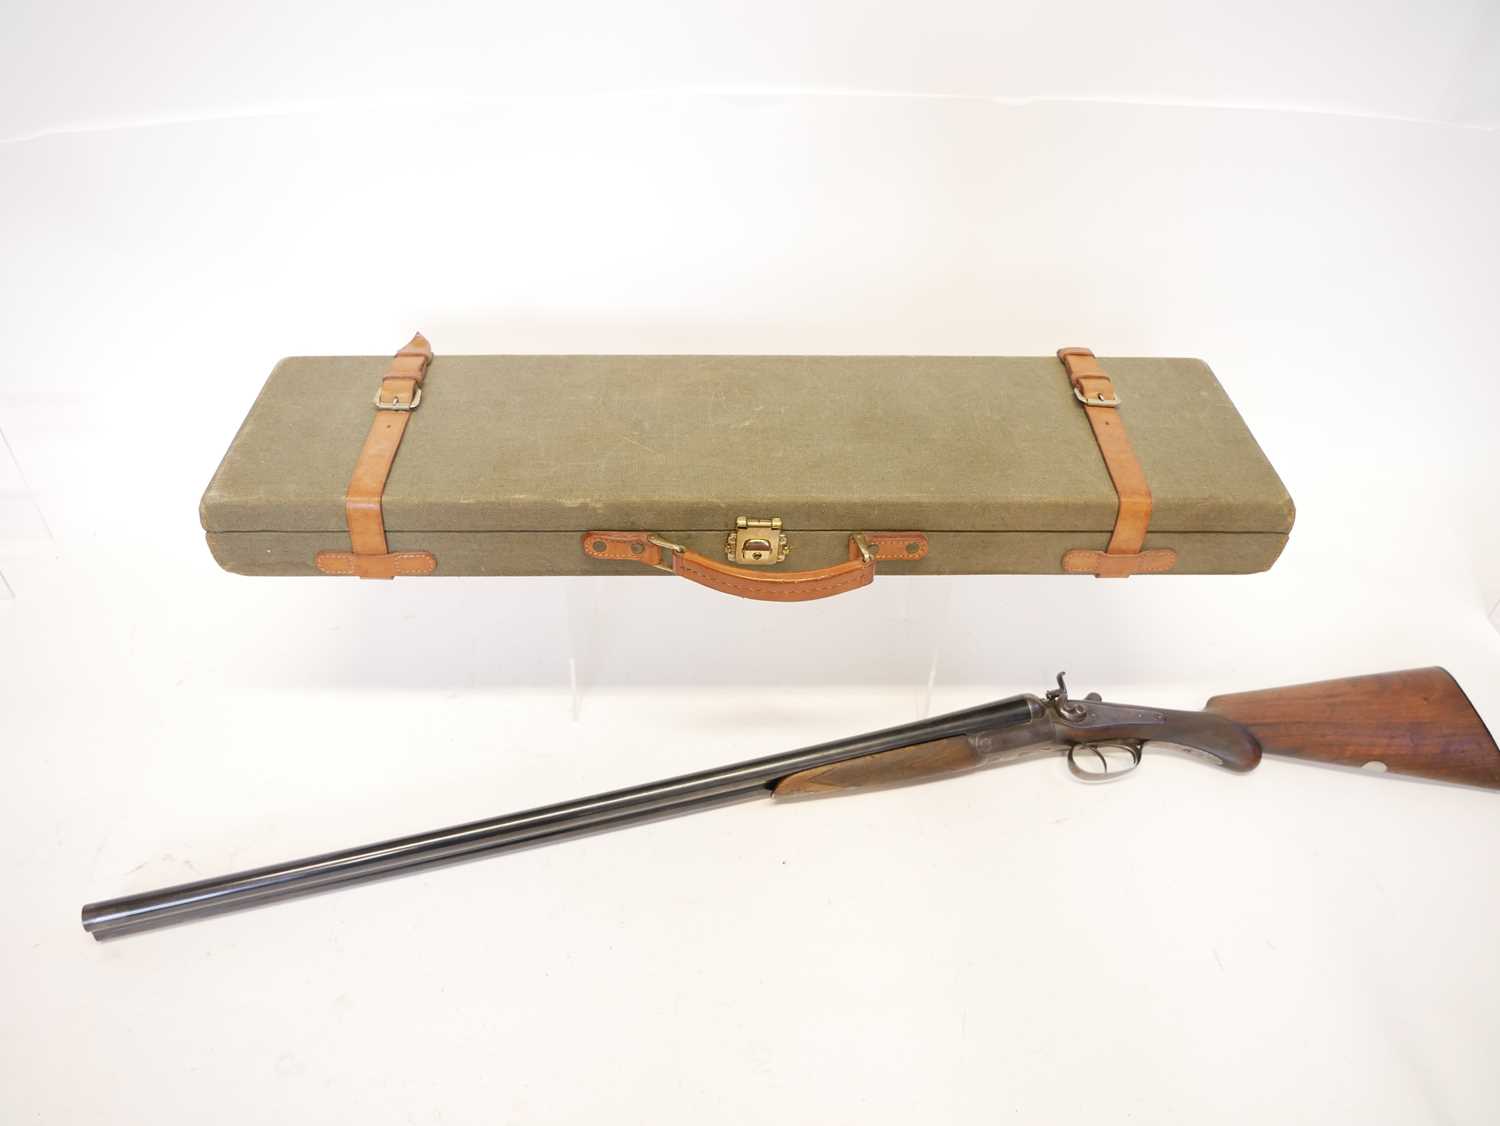 Midland 12 bore side by side hammer gun with a Gunmark travel case, serial number 32121, 30 inch - Image 13 of 16